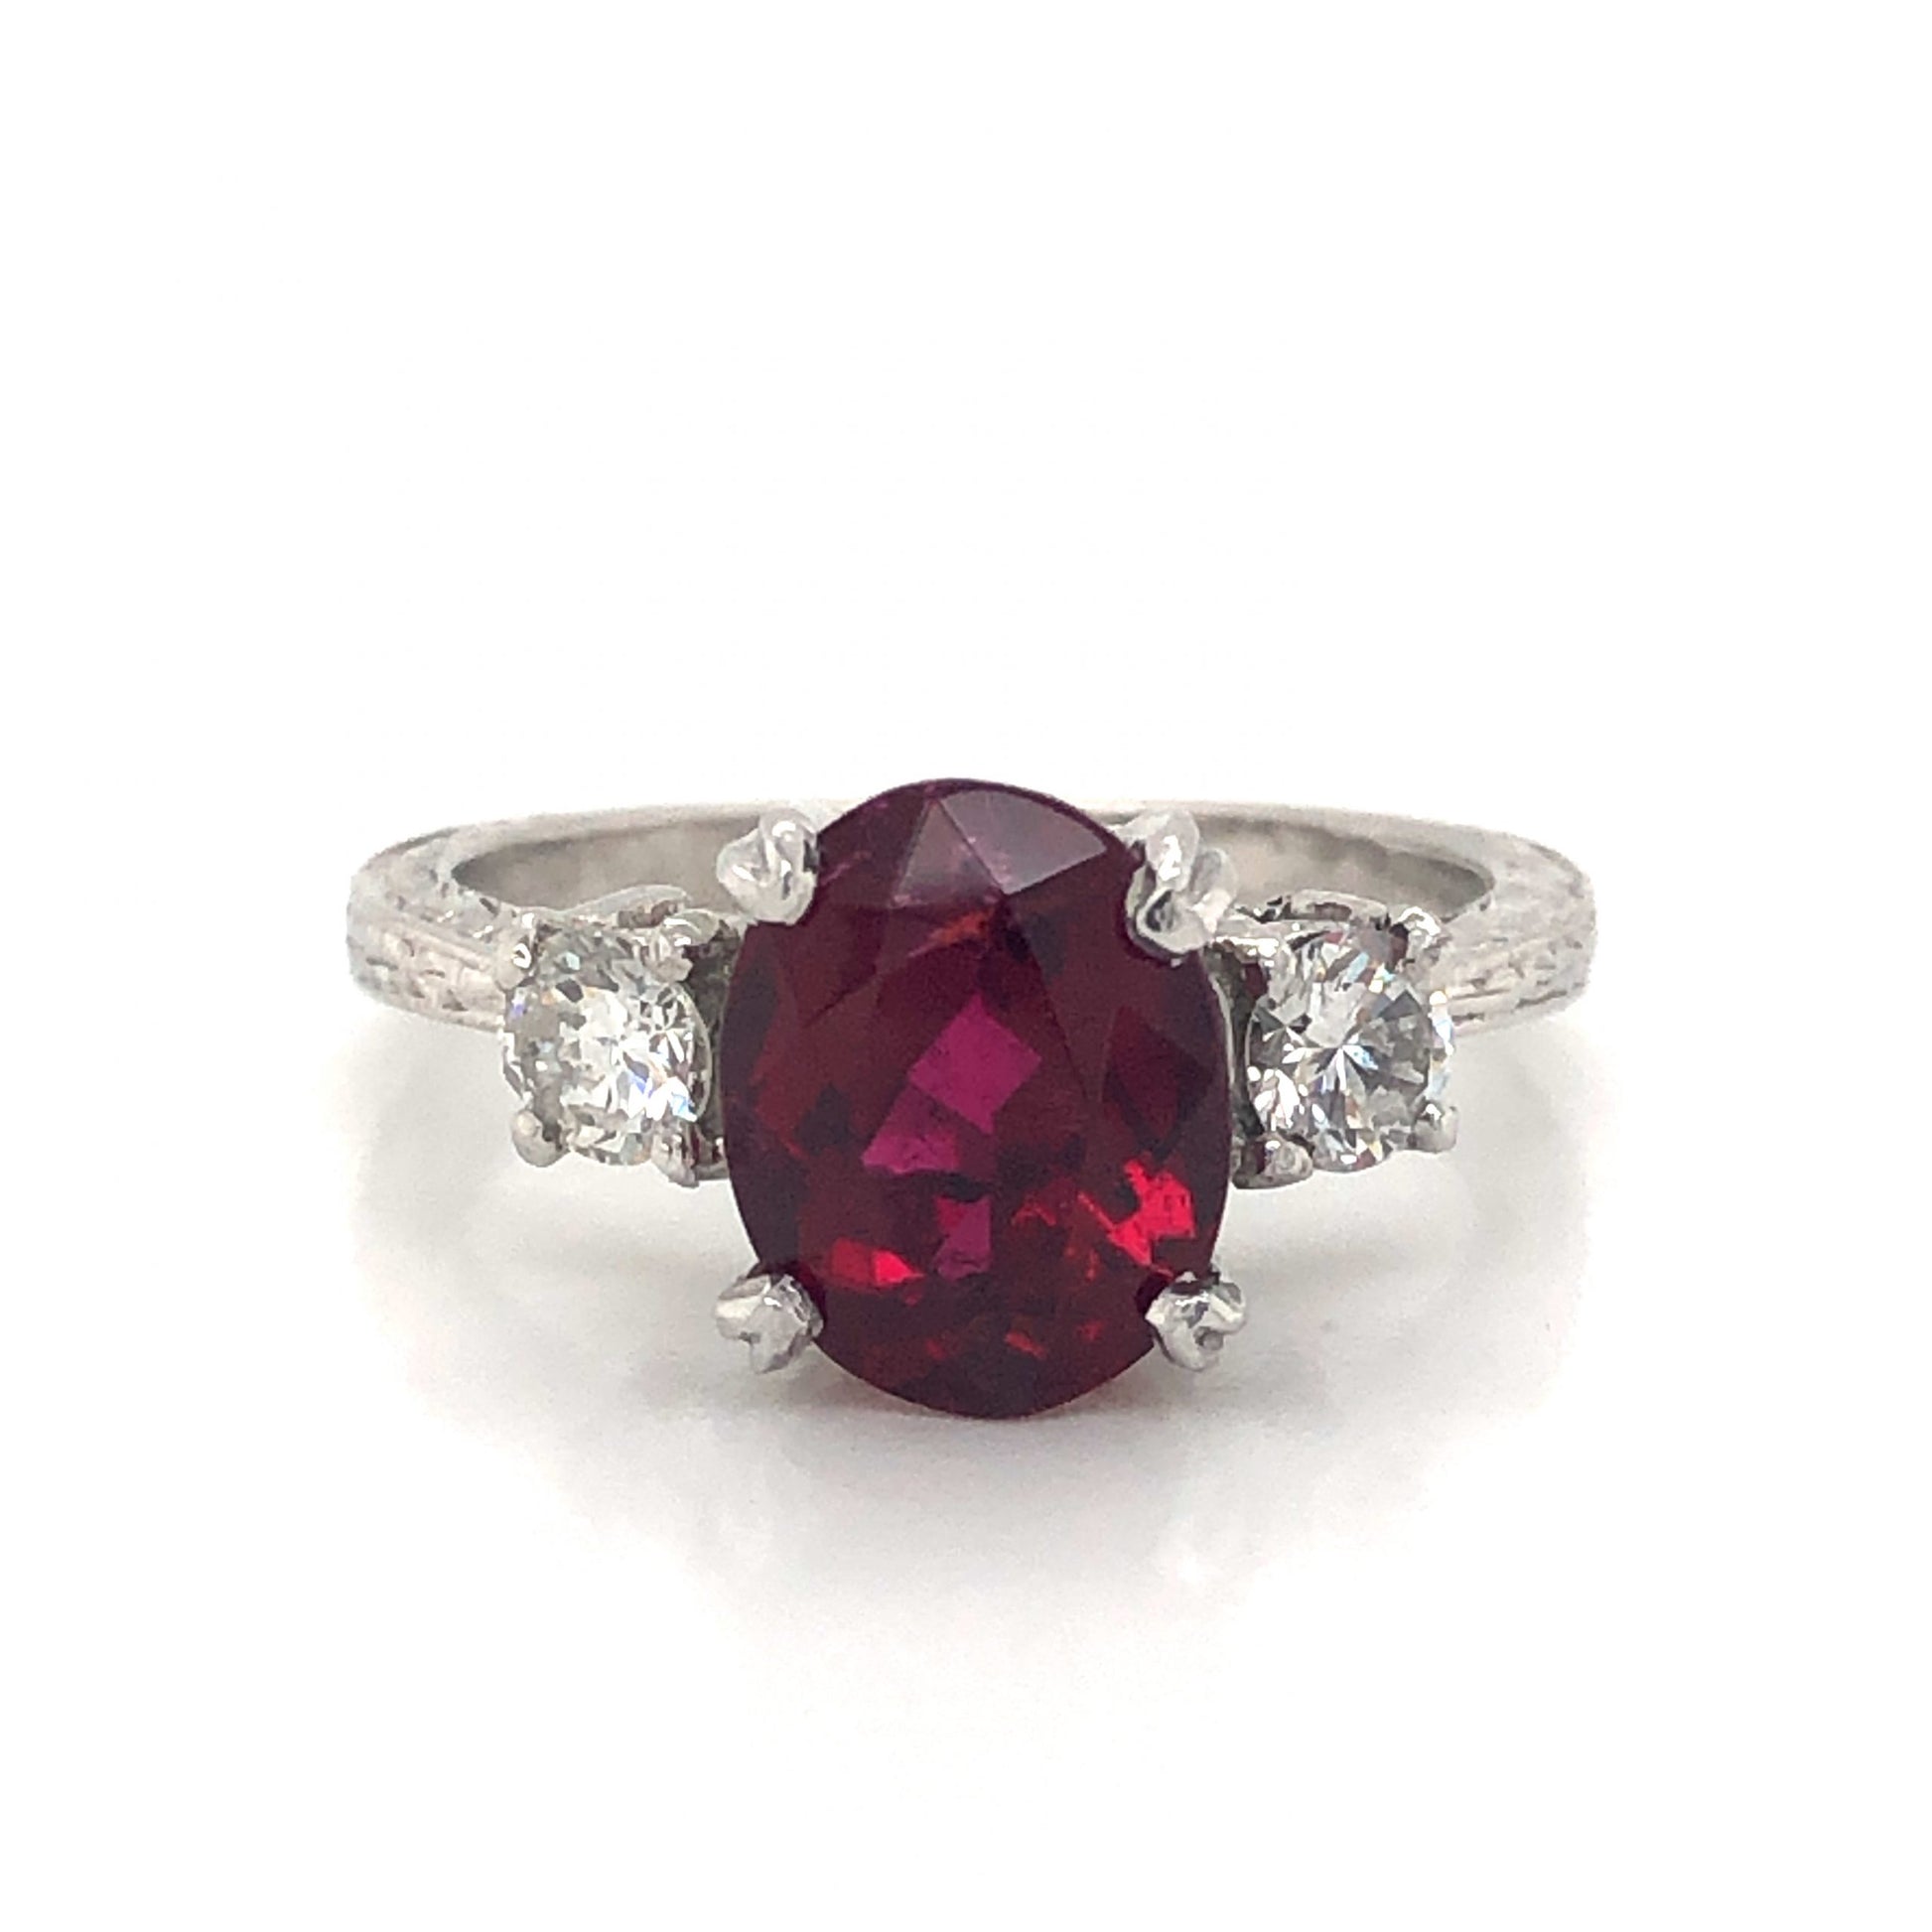 Tacori Oval Ruby Engagement Ring in PlatinumComposition: Platinum Ring Size: 5 Total Diamond Weight: .34ct Total Gram Weight: 5.4 g Inscription: PLAT TACORI
      